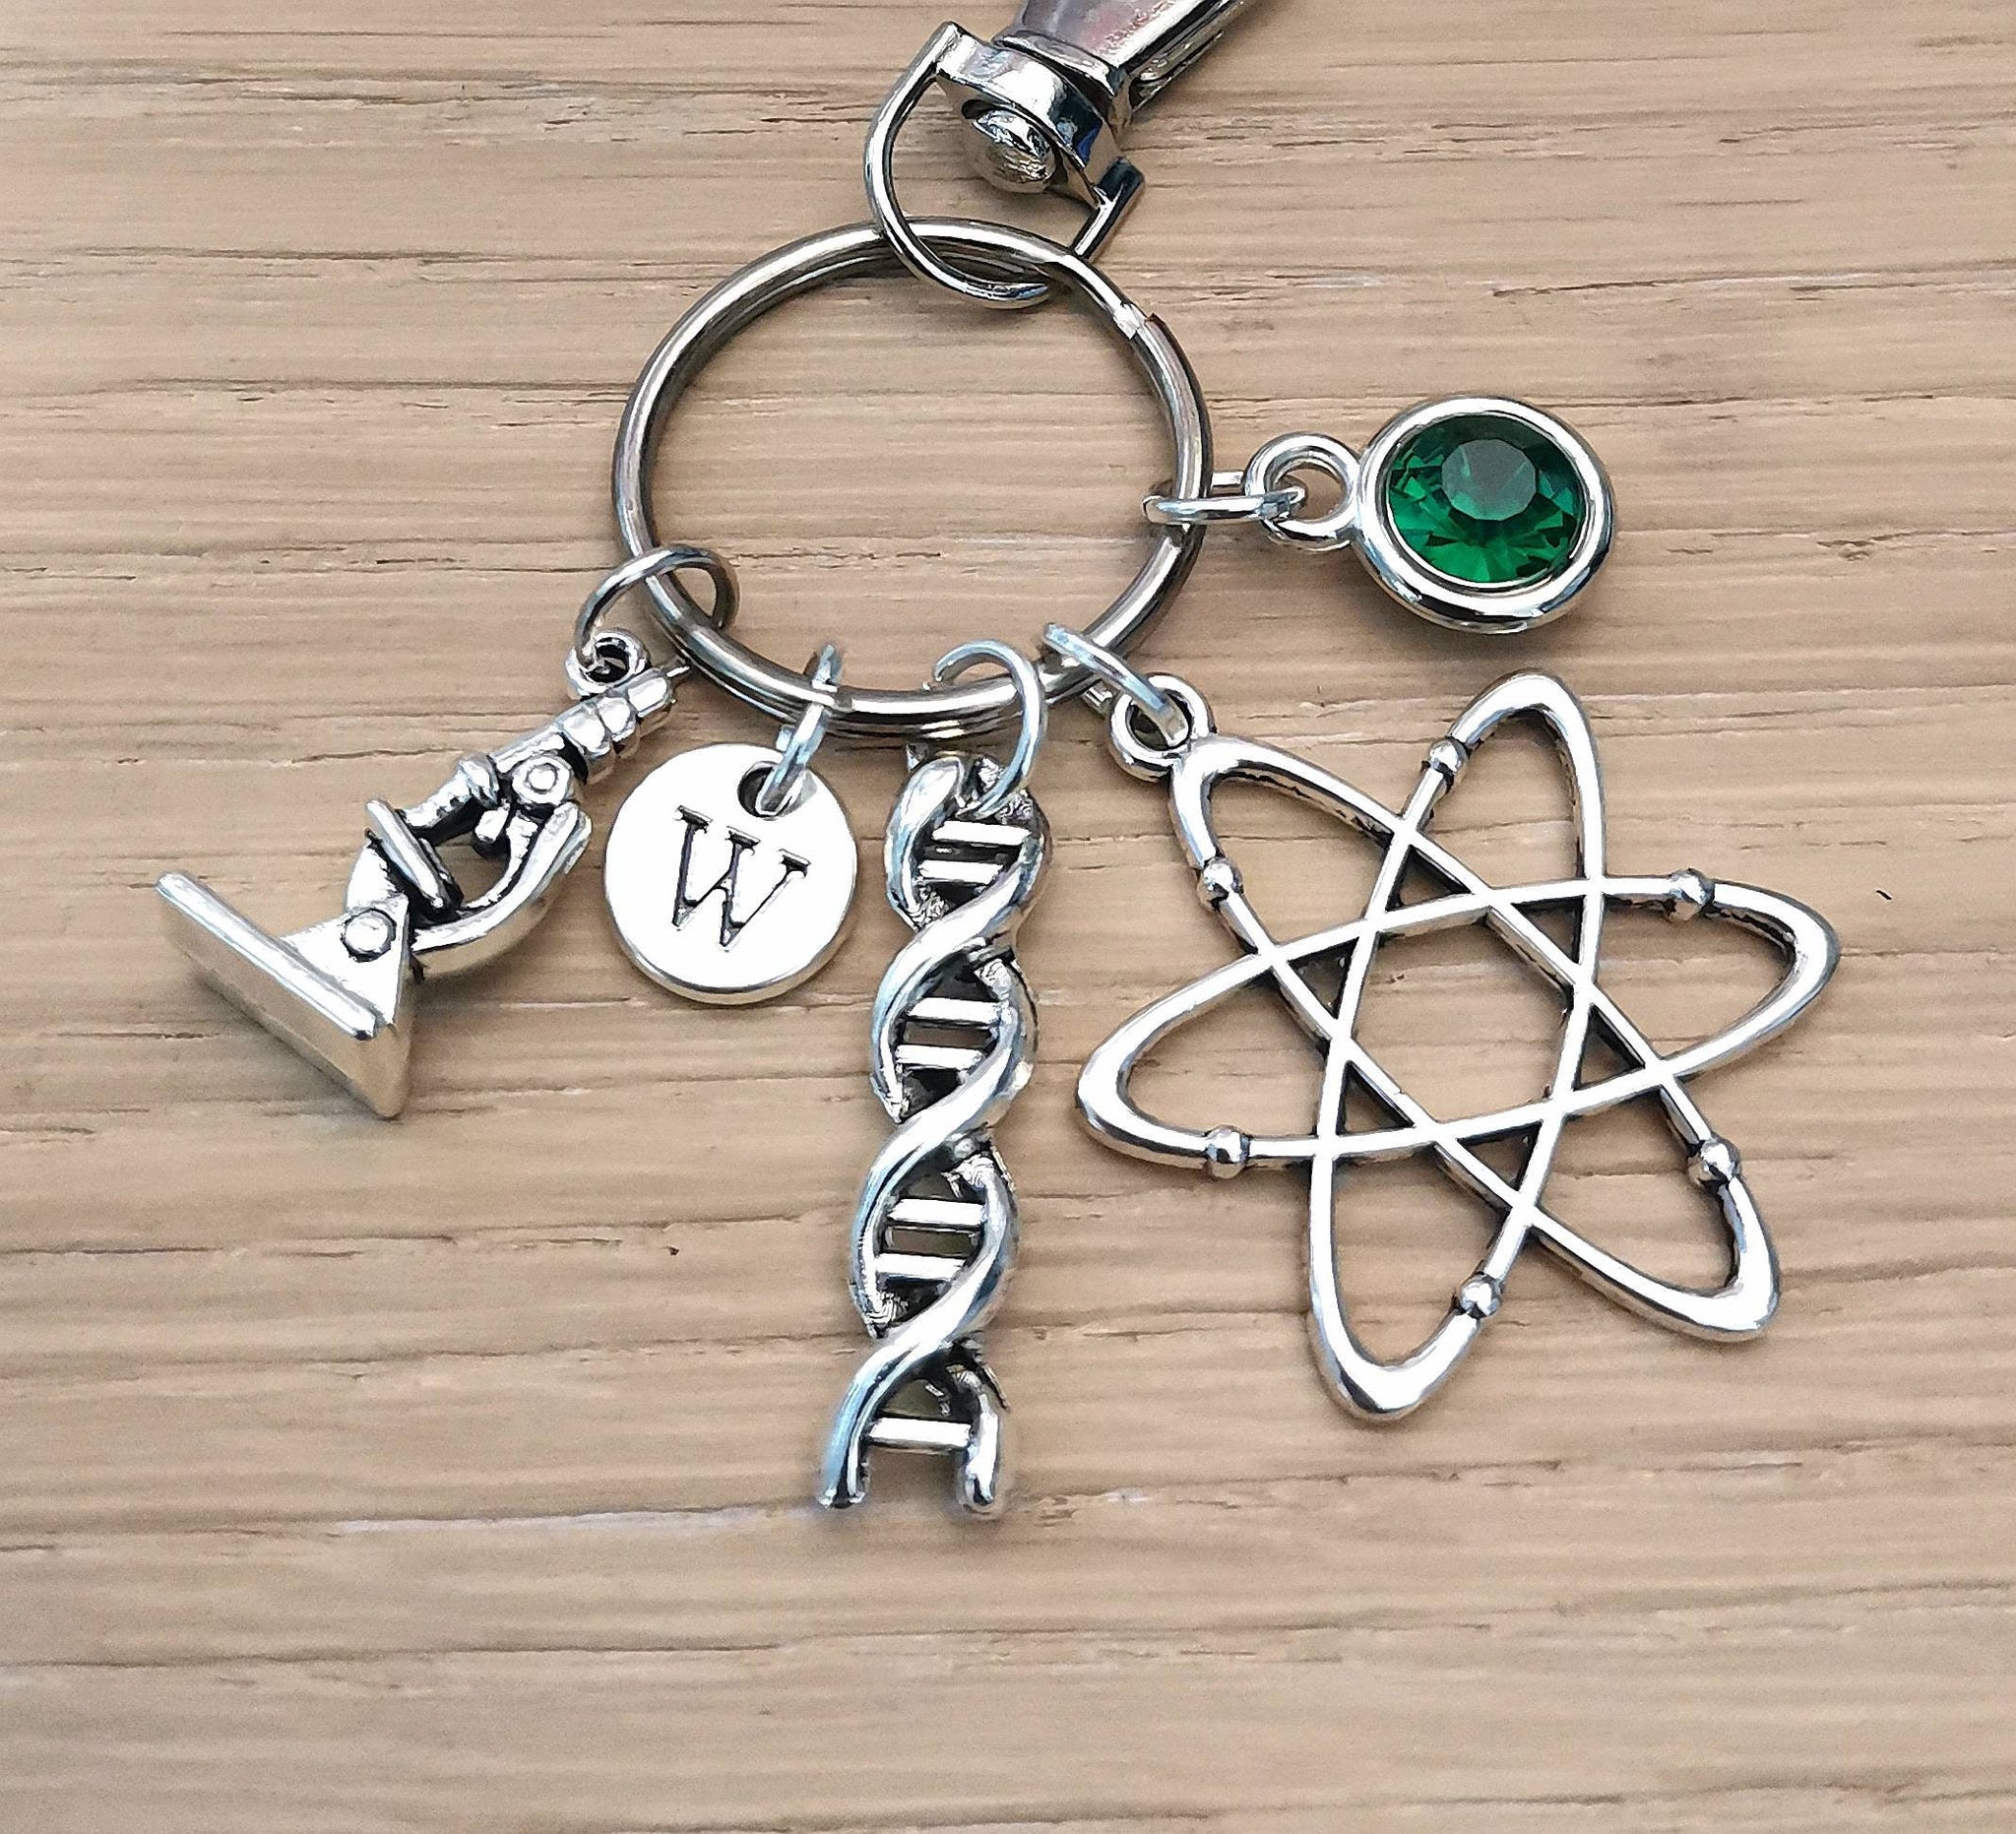 Science geek gift, science gift, science keychain, science keyring, science keychain, gift for geek, Atom, DNA, Chemist, Chemistry, Physics